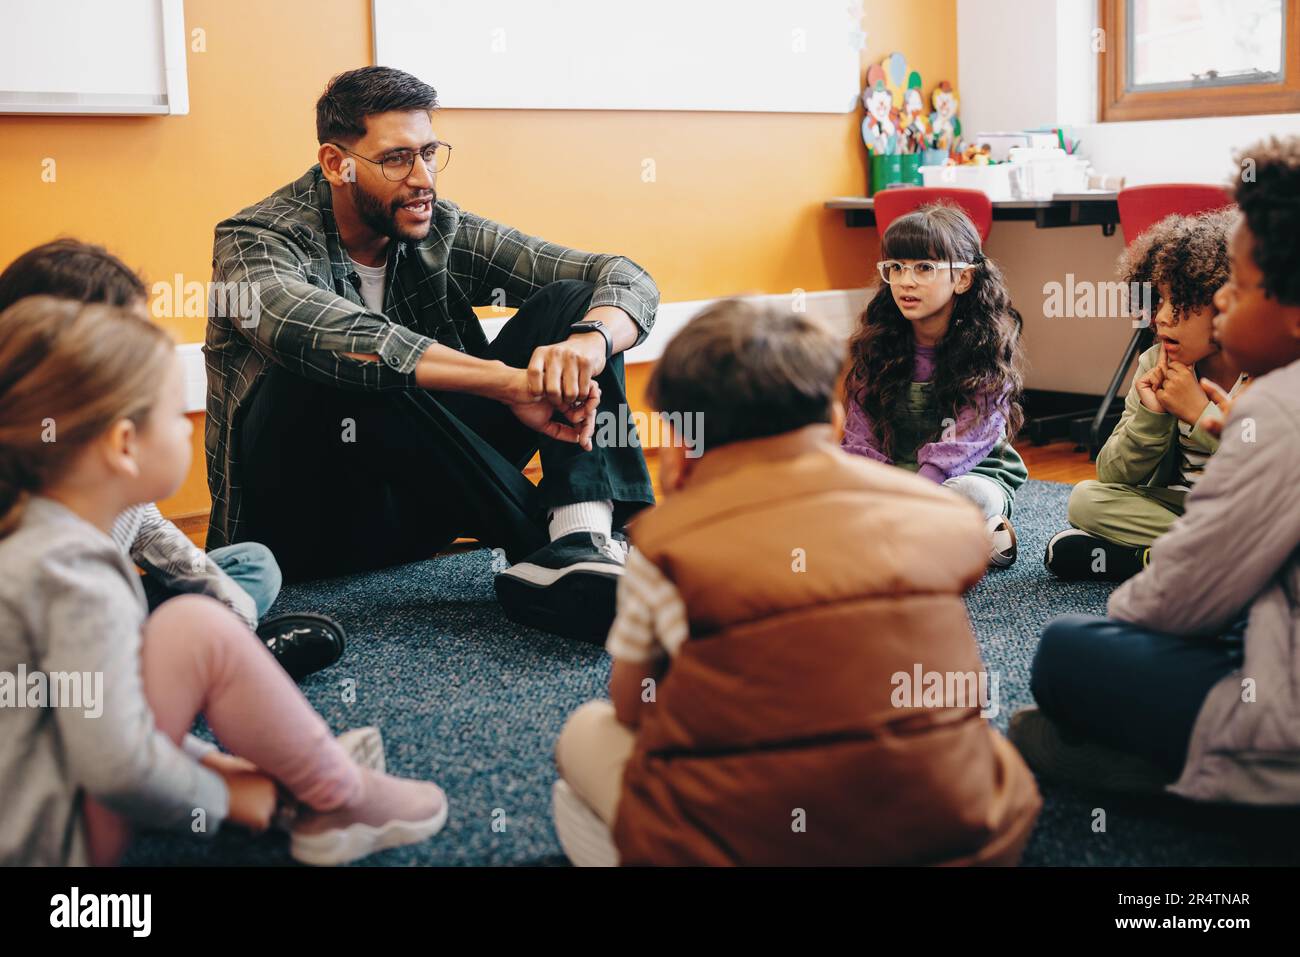 Teacher sitting on the floor with his students in an elementary school classroom, he is talking to them as they sit in a circle. Man teaching a group Stock Photo